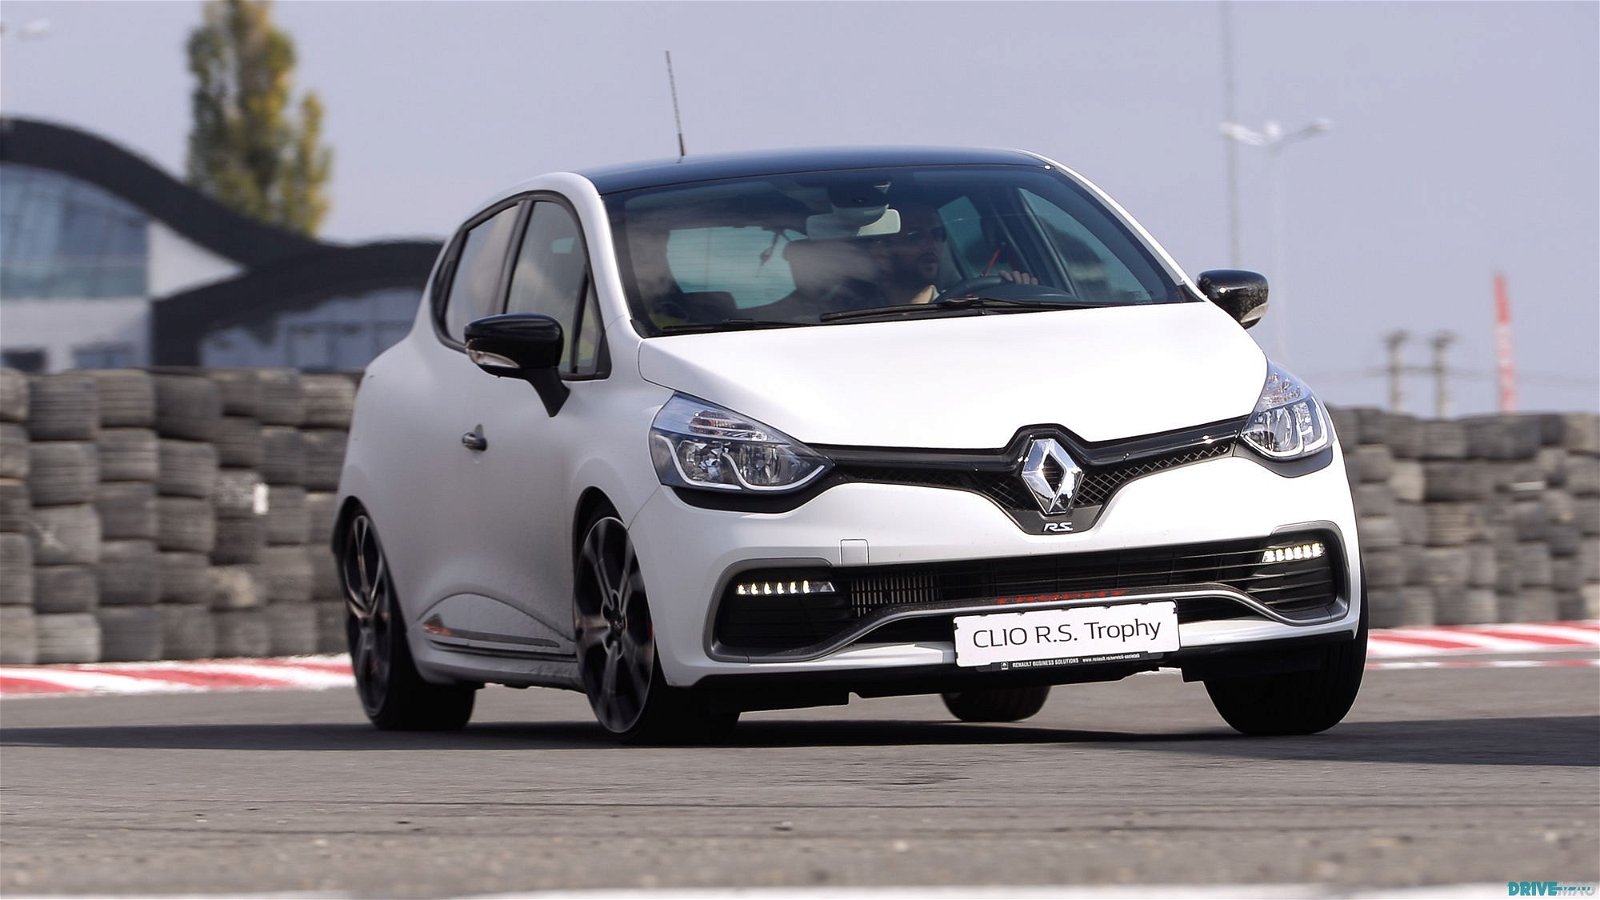 New Renault Clio RS Will Pretty Much Look Like This